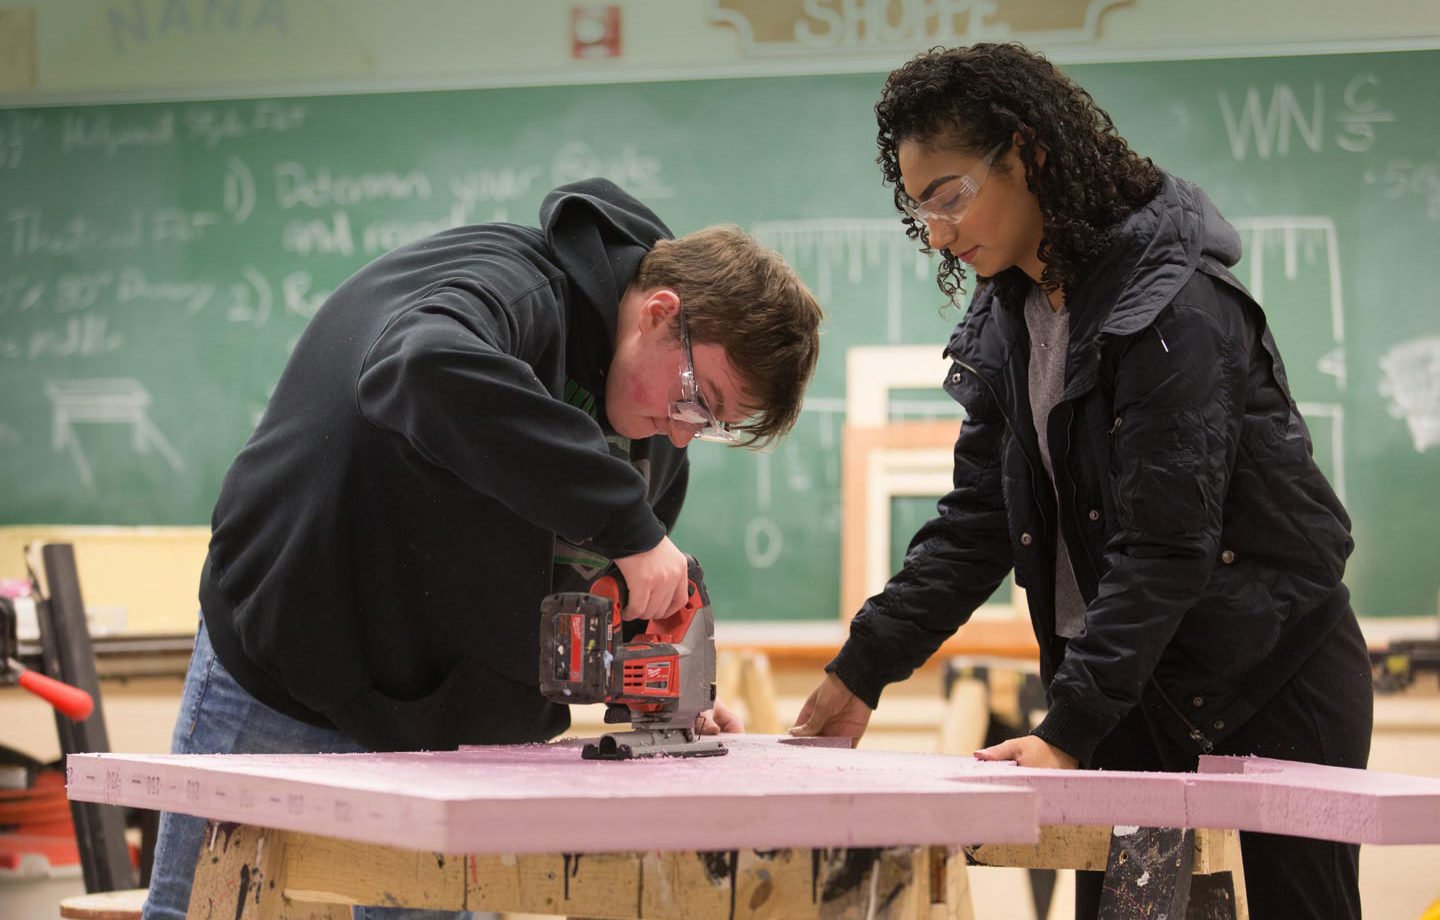 A male and female high school student working together in a wood shop